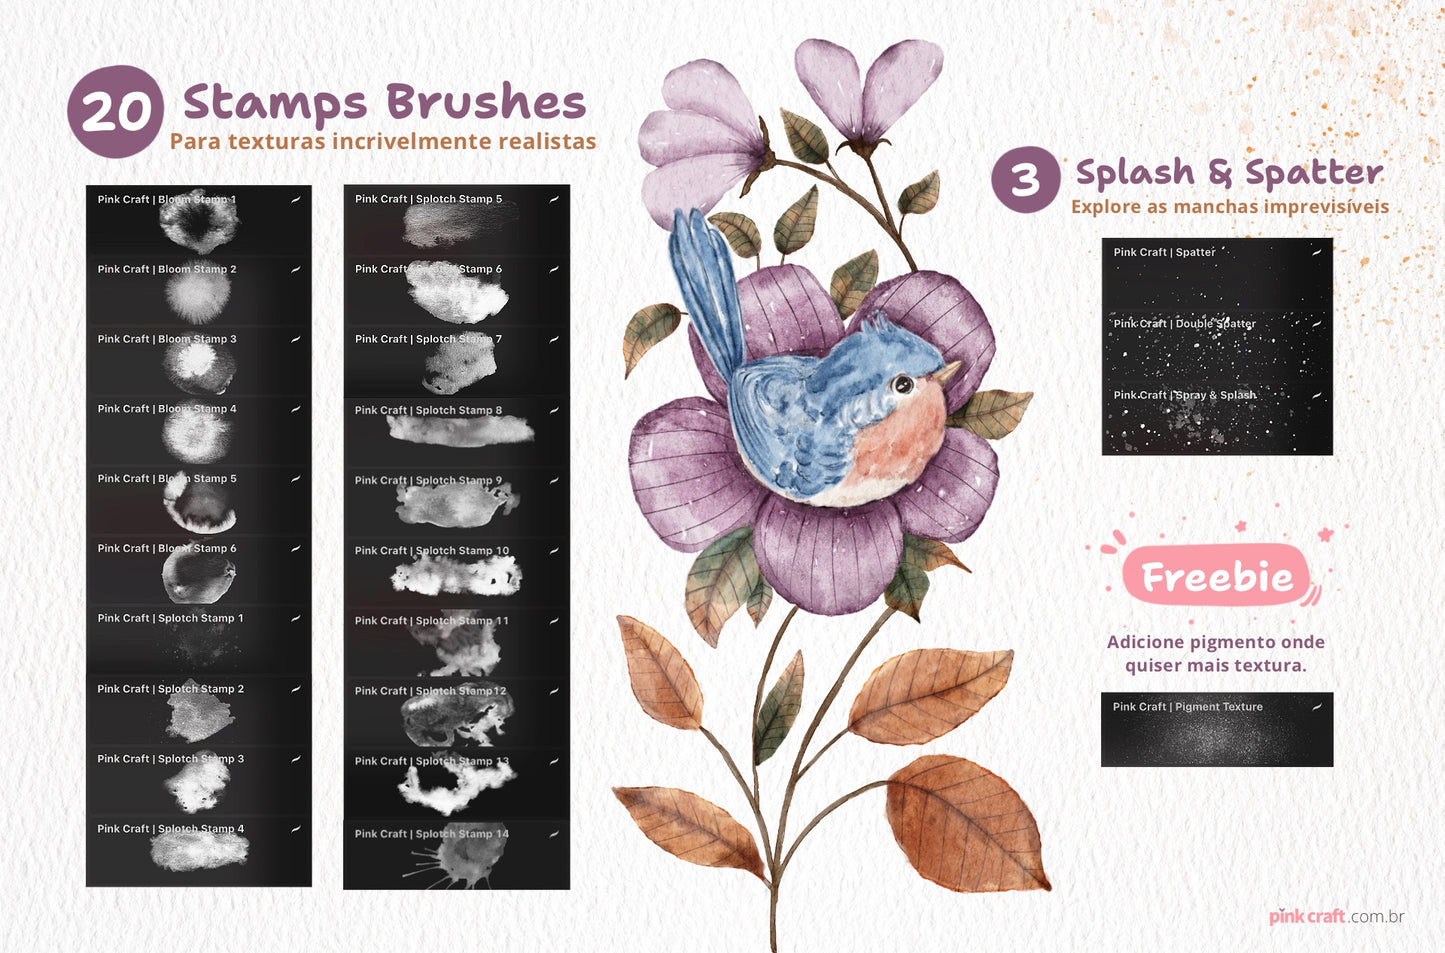 Pink's Watercolor Brushes